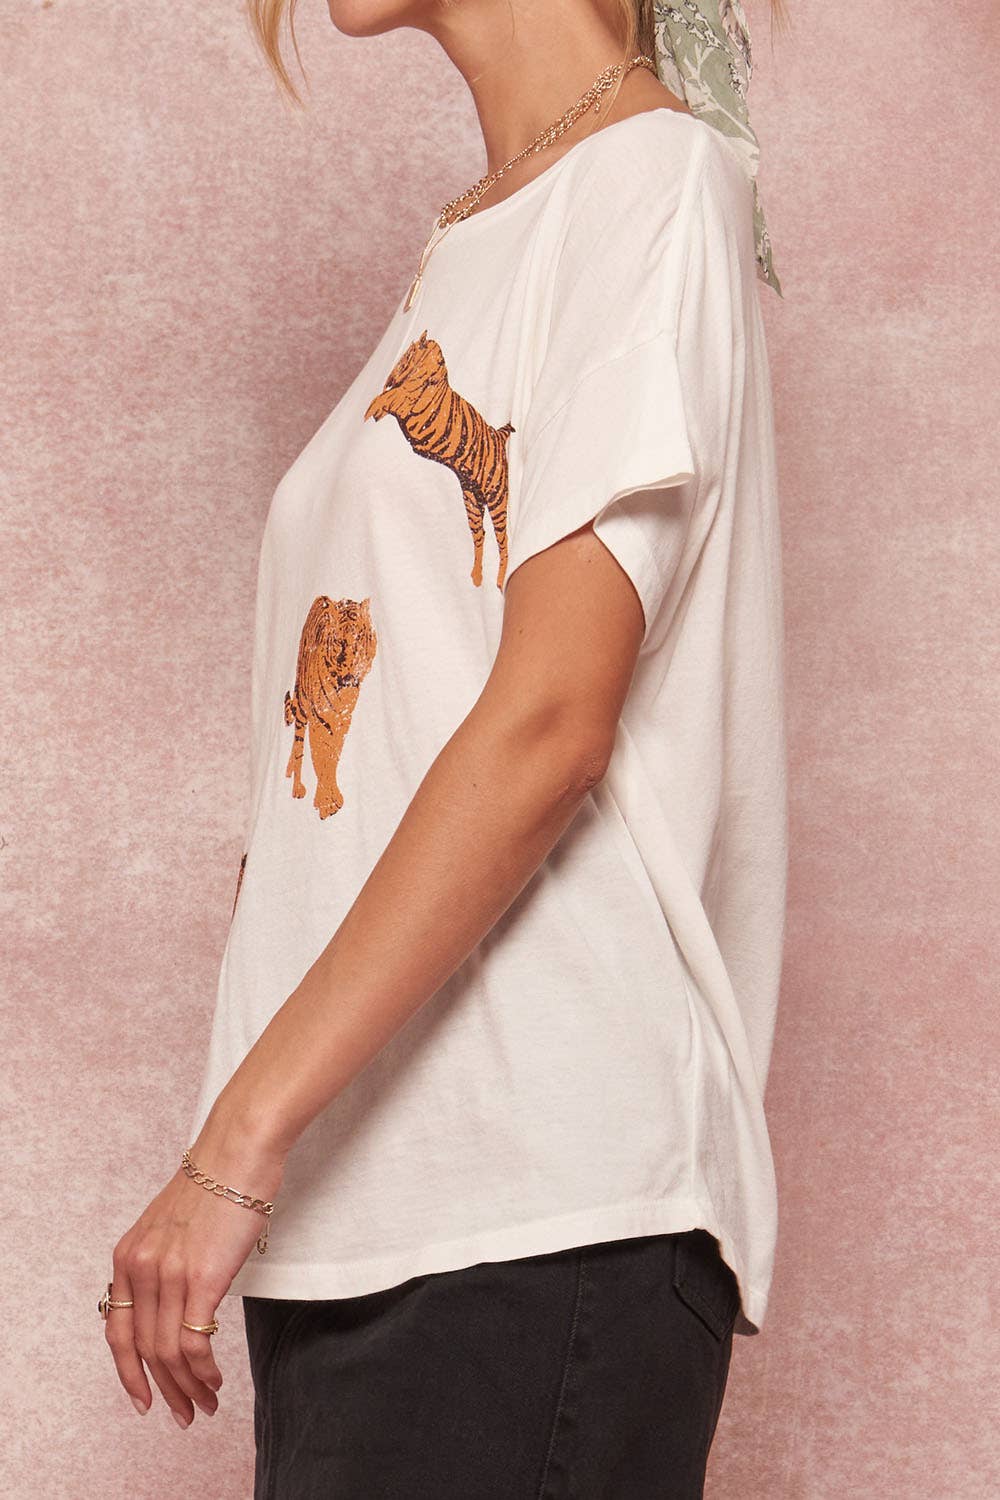 Tiger Vintage Garment Washed Graphic Tee